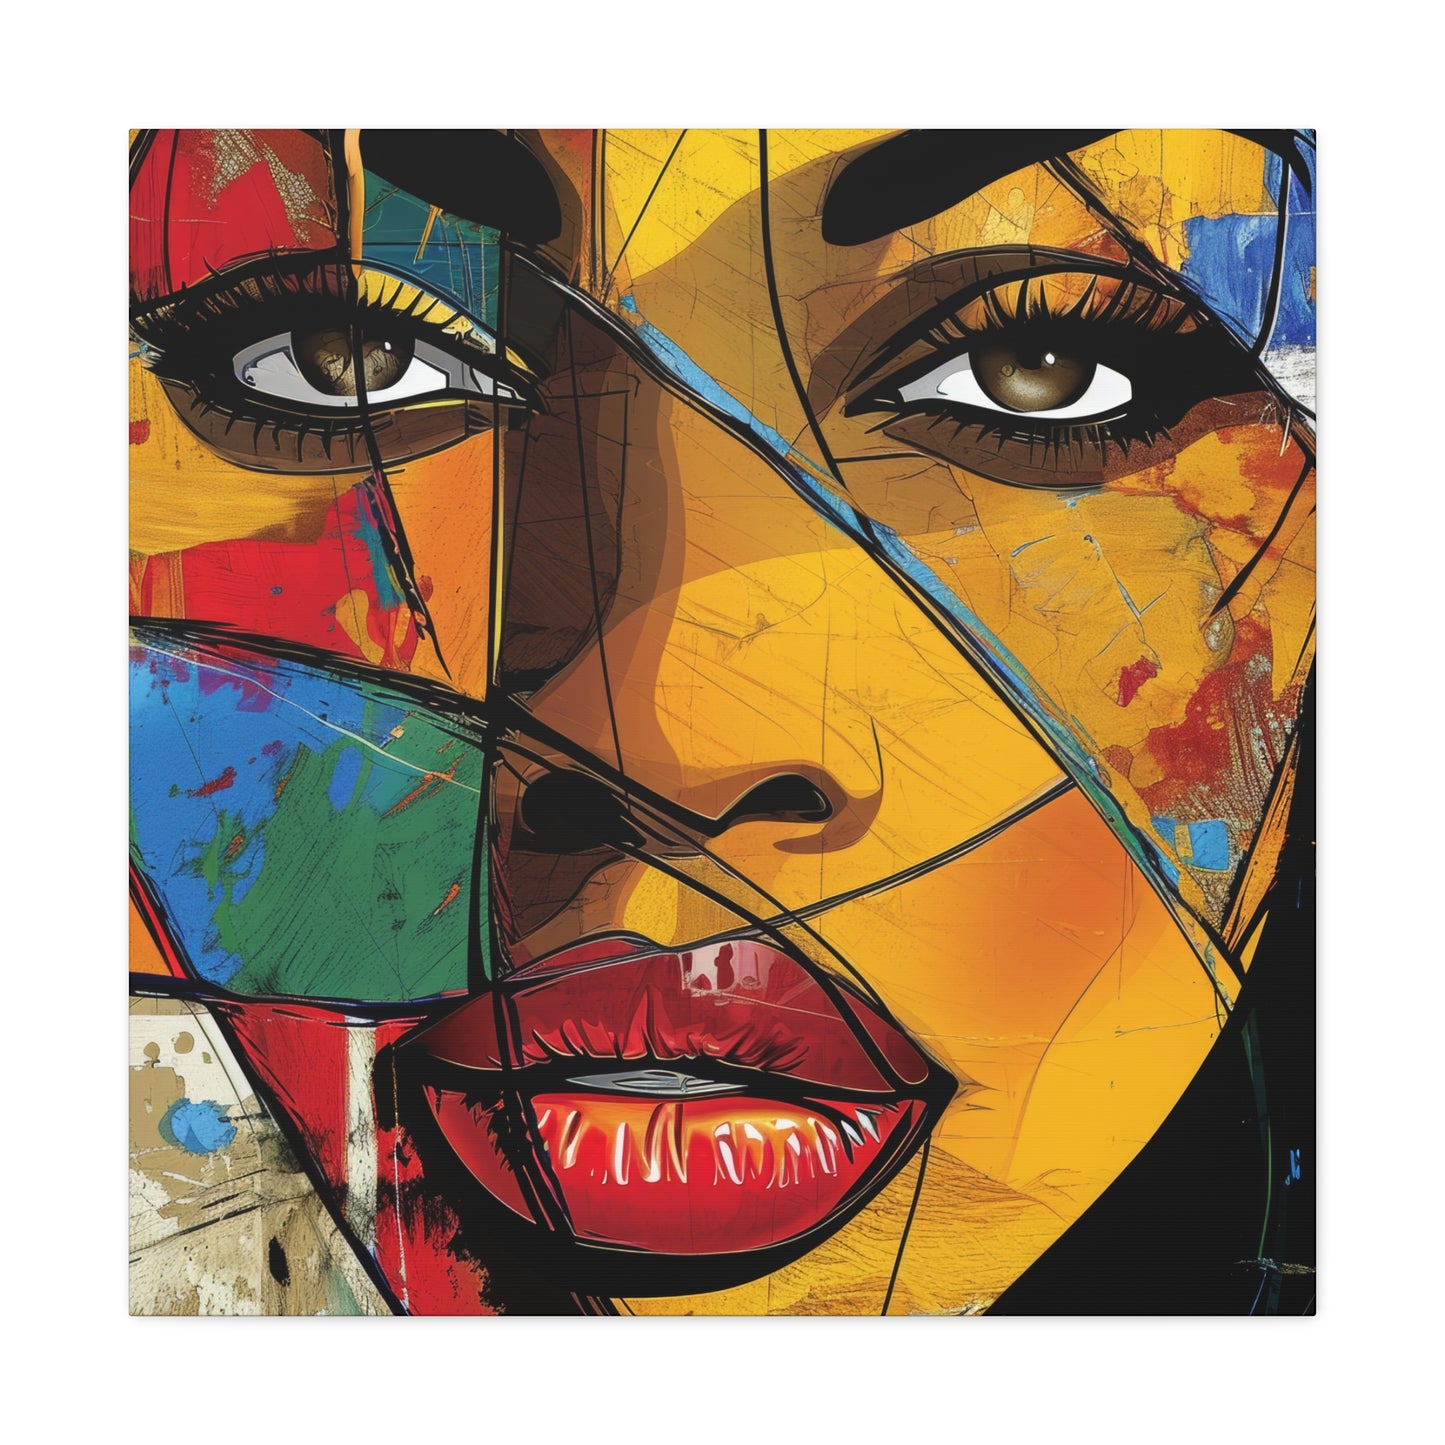 Vibrant digital art portrait featuring a mosaic of bold colors and sharp lines, showcasing a woman's face with intense eyes and full lips. Unique blend of abstraction and realism | EbMerized Creations